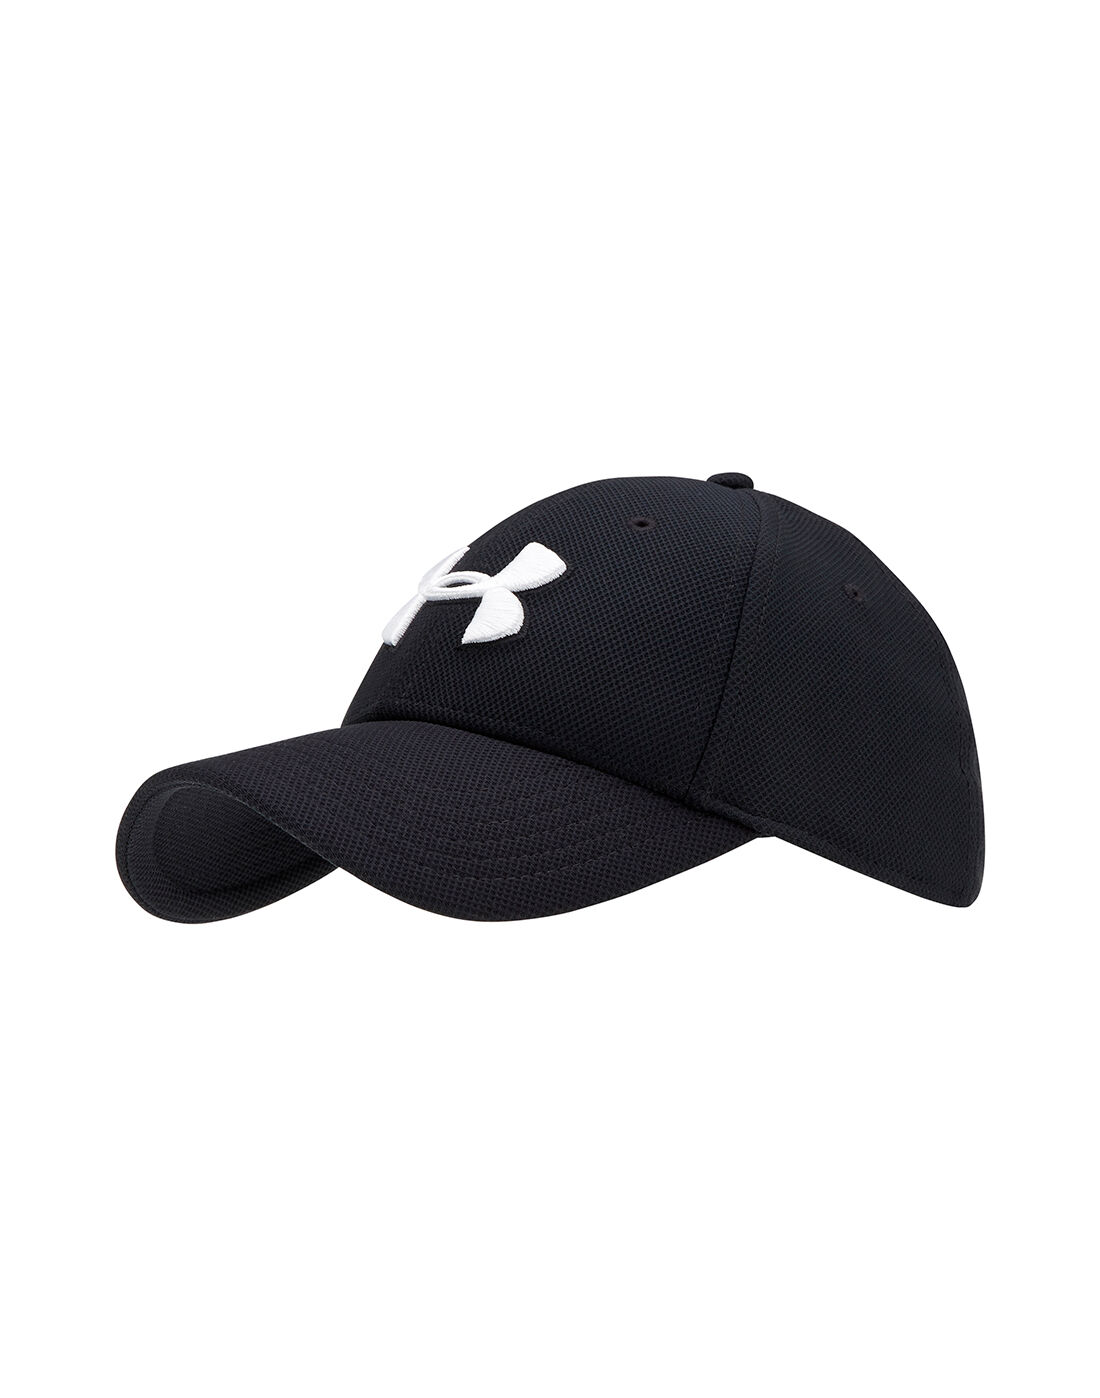 Under Armour Blitzing Cap | Life Style 